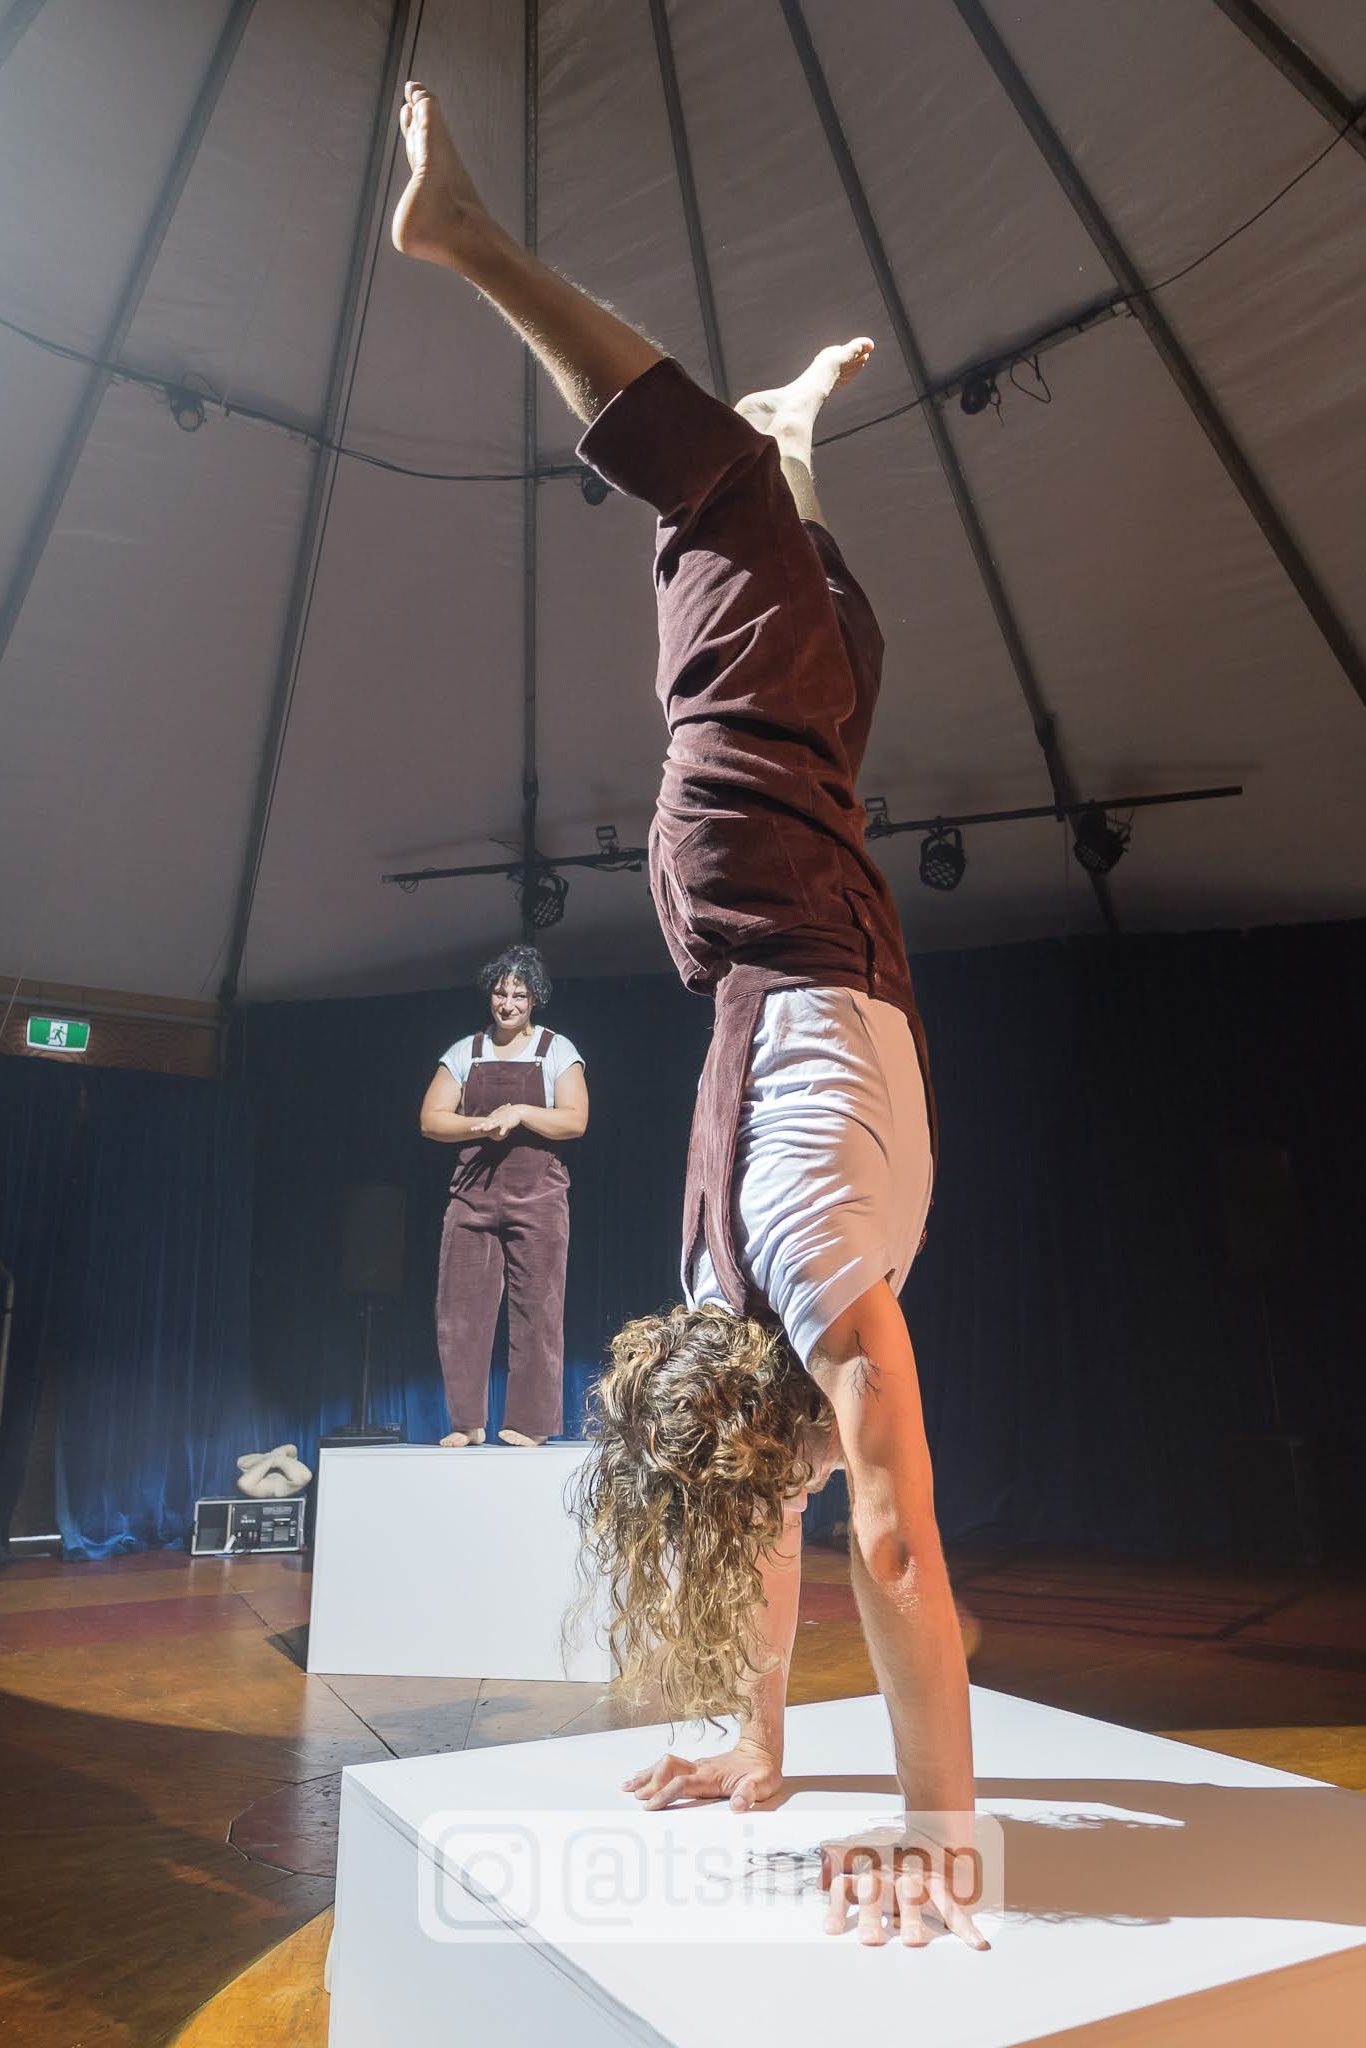 Two performers on stage atop separate large white plinths. Sam is in the foreground handstanding, Em behind presenting with adjoining arms.